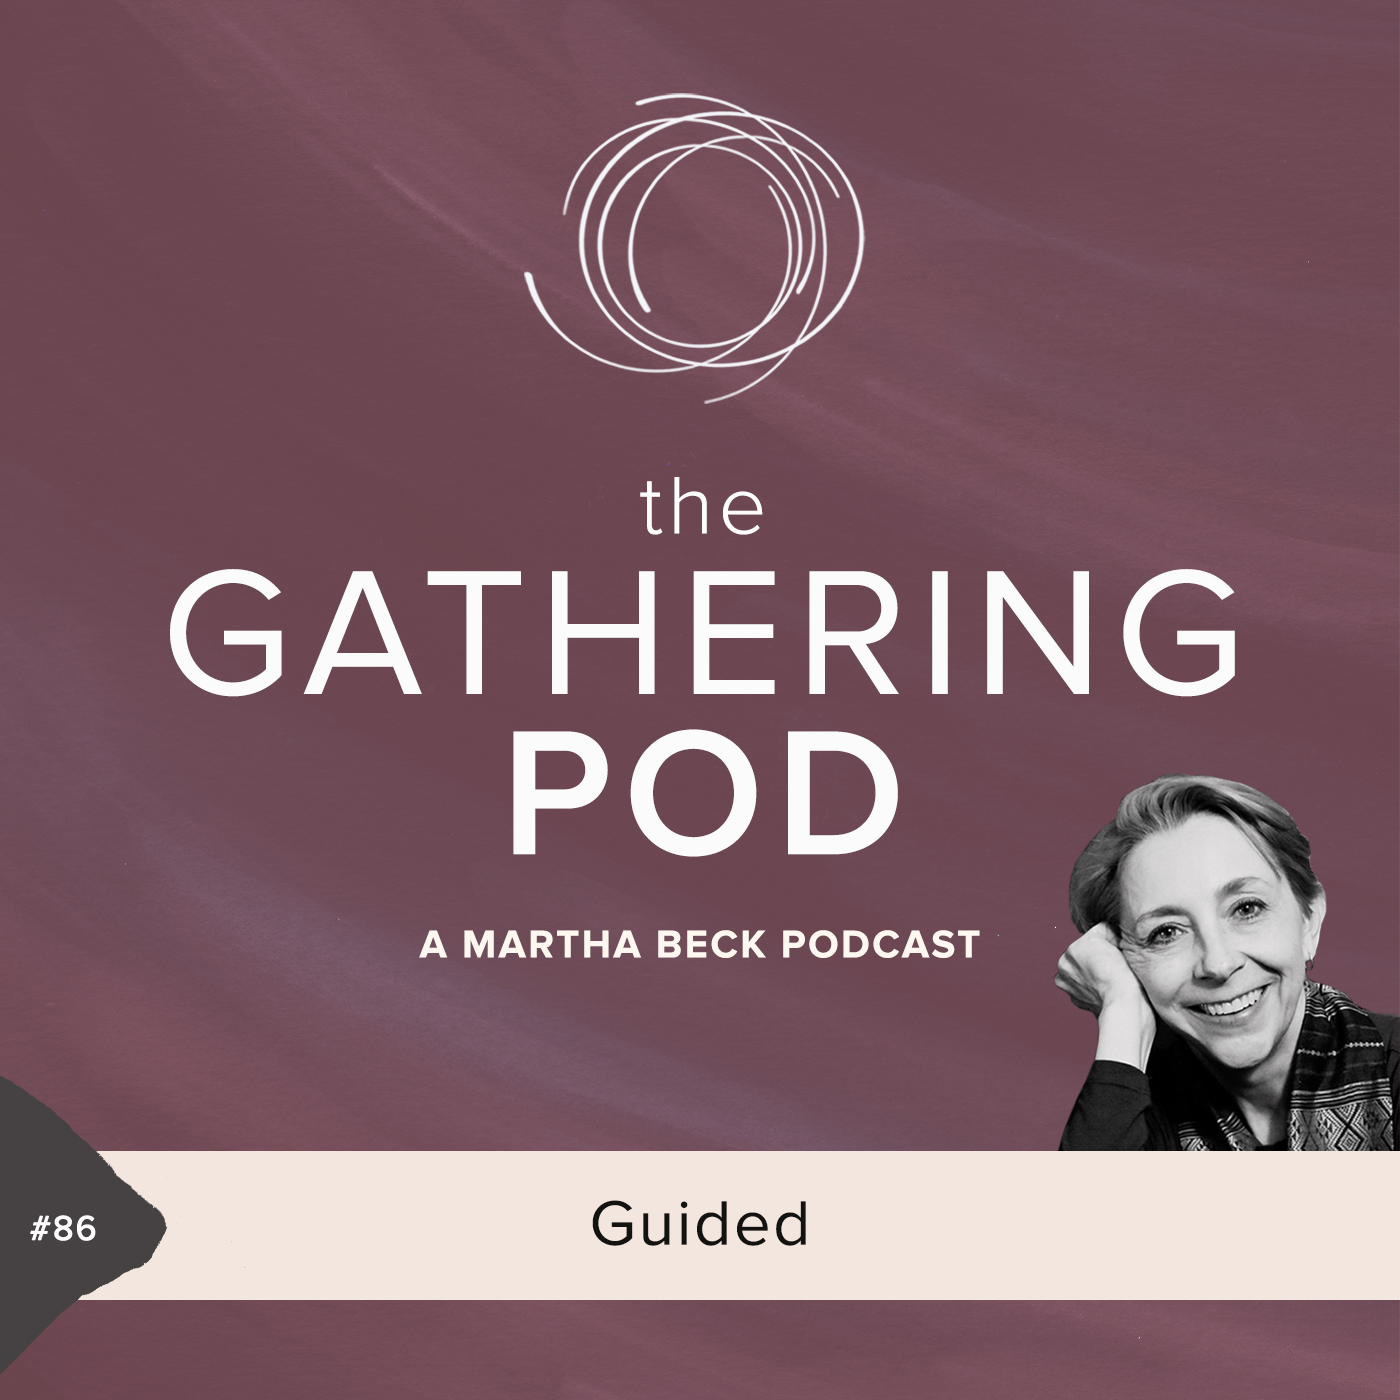 Image for The Gathering Pod A Martha Beck Podcast Episode #86 Guided